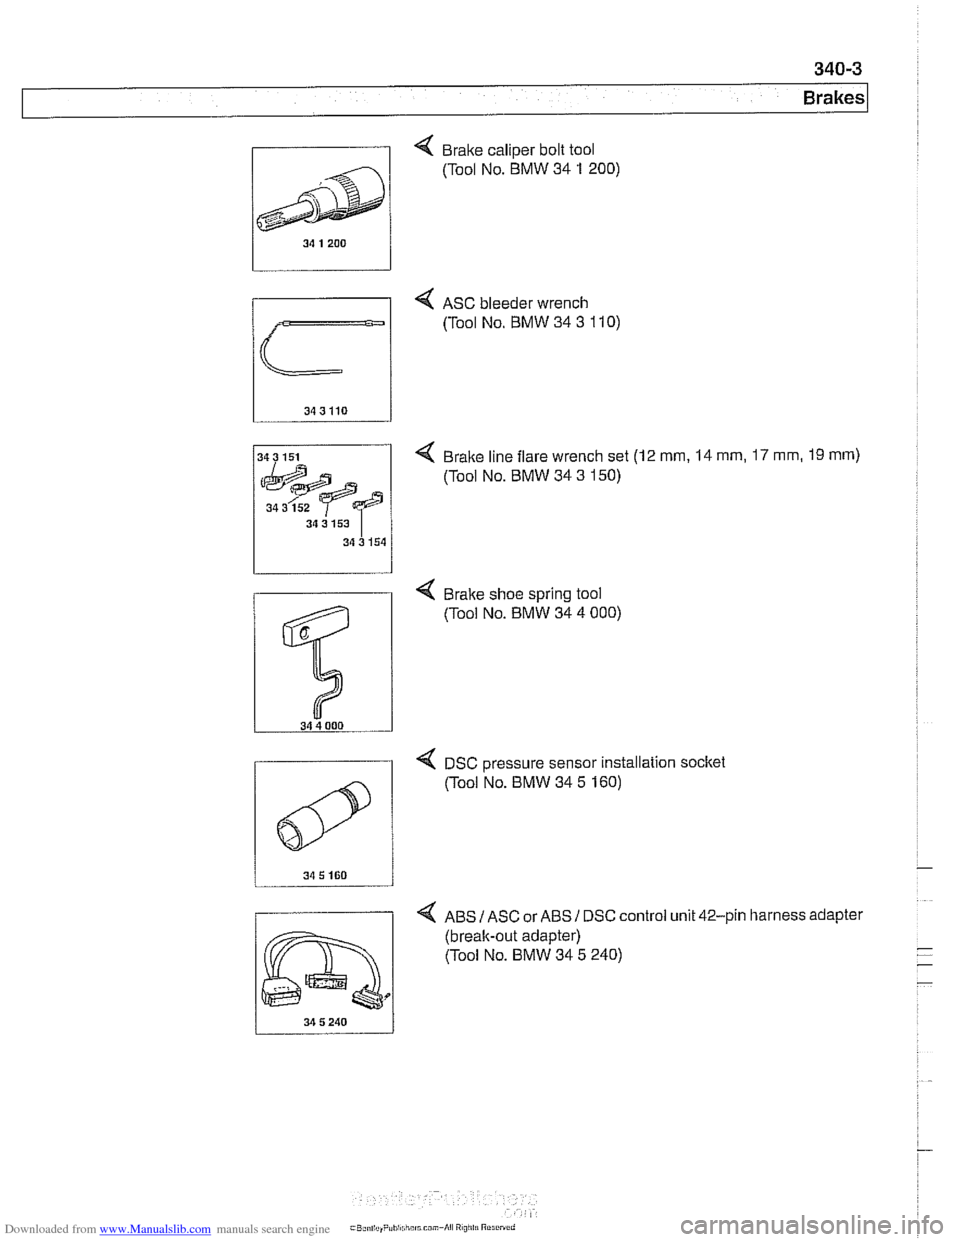 BMW 525i 2001 E39 Owners Manual Downloaded from www.Manualslib.com manuals search engine 
, Brake caliper bolt tool 
4 ASC bleeder wrench 
(Tool No.  BMW 34 
3 110) 
4 Brake line flare wrench  set (12 mm, 14 mm, 17 mm, 19 rnm) 
(Too